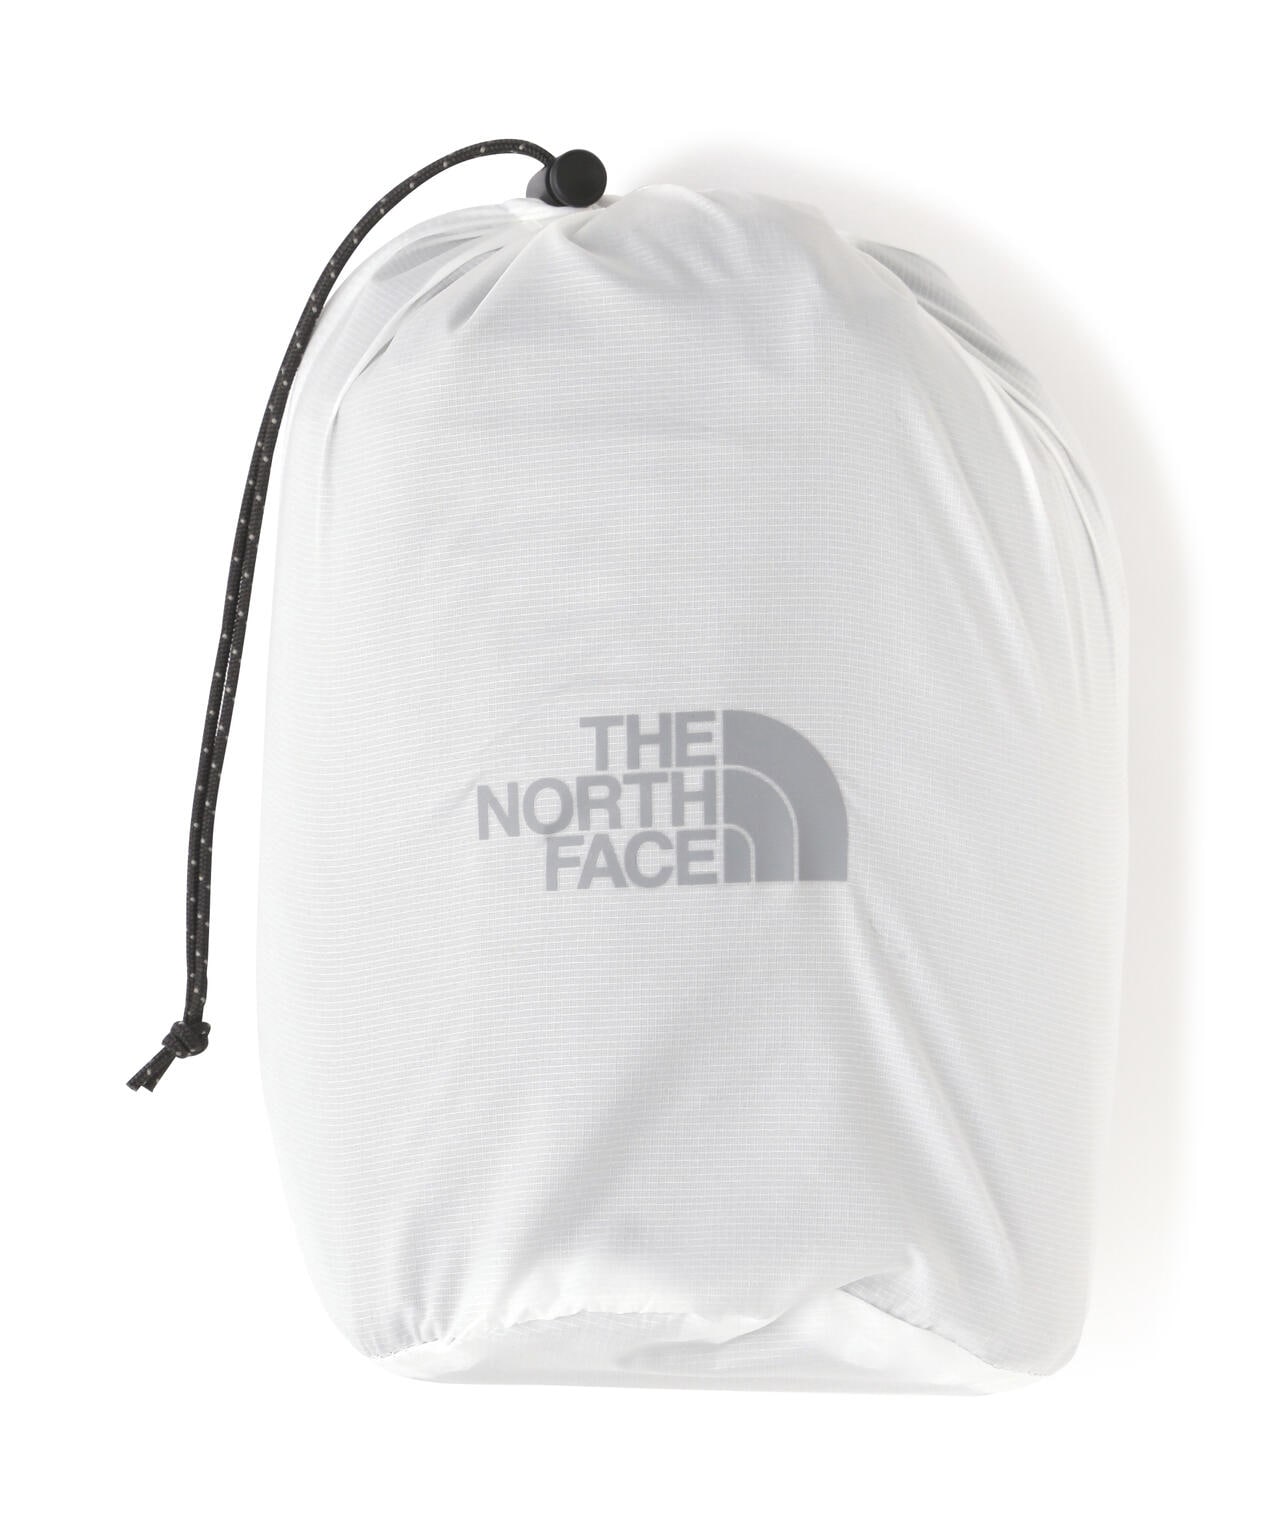 THE NORTH FACE (ノースフェイス)Compact Jacket NP72230